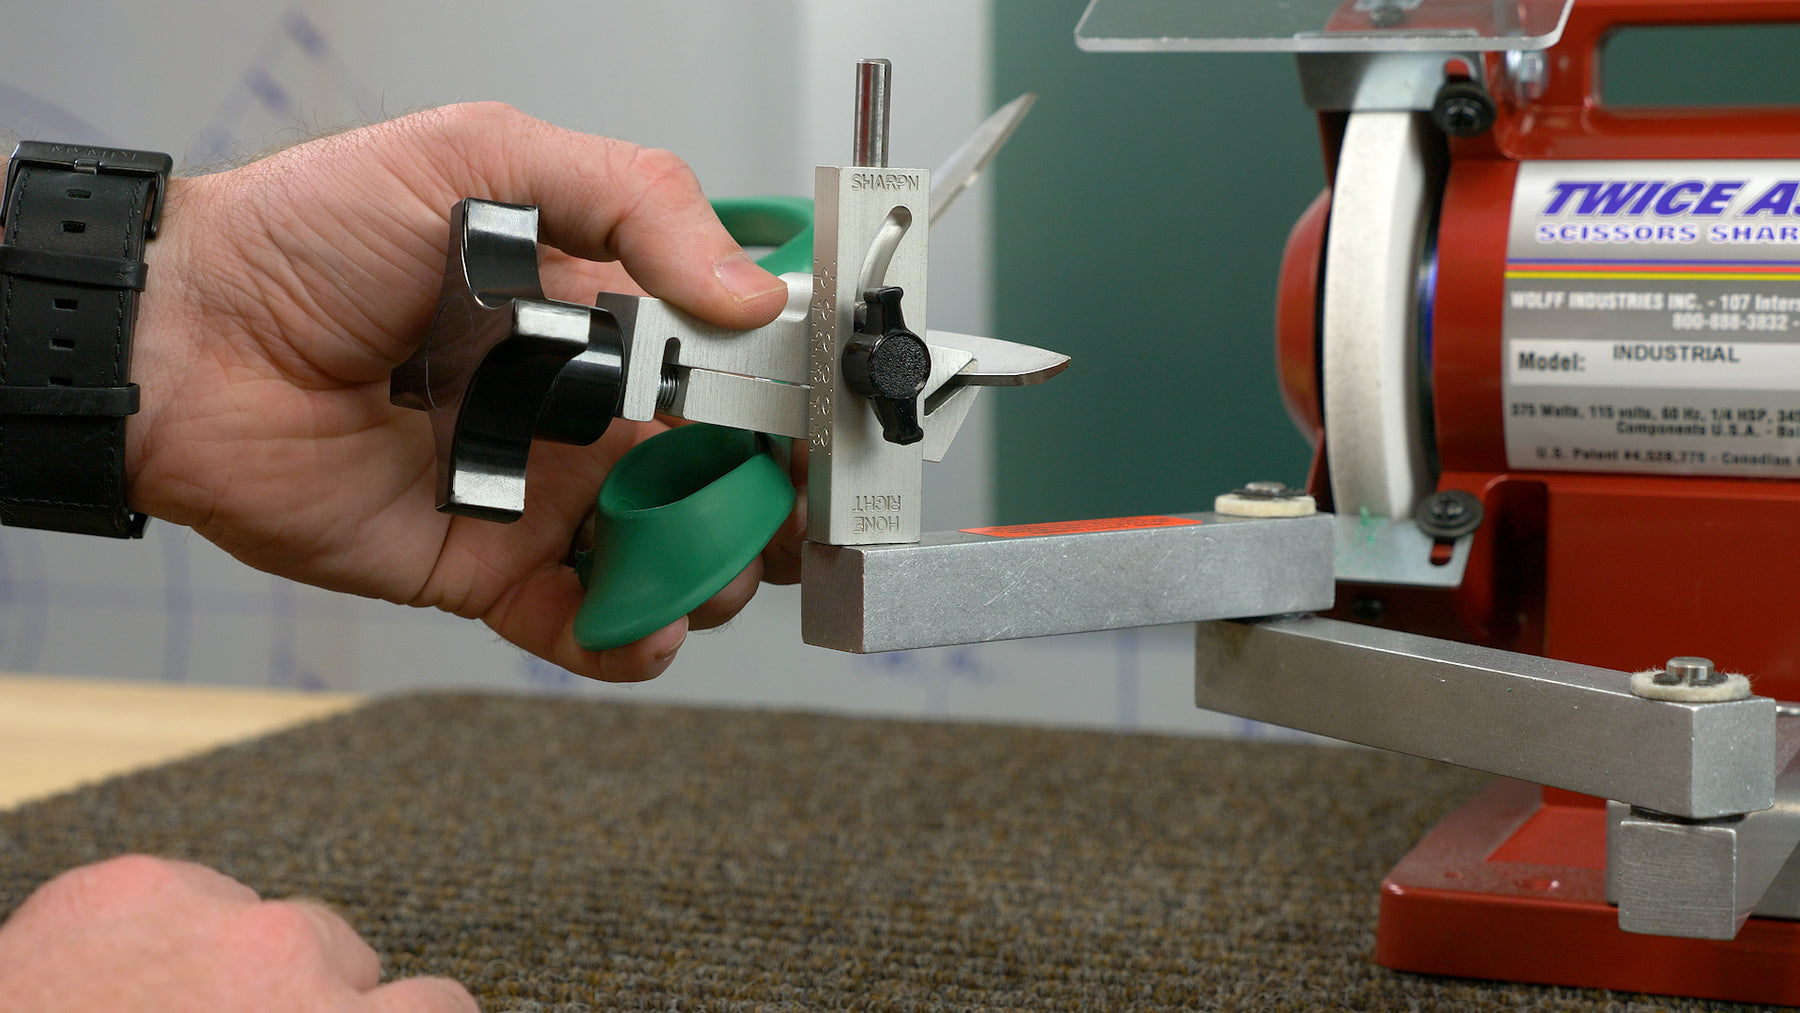 How to Sharpen a Pair of Scissors on the Twice as Sharp® Sharpening System